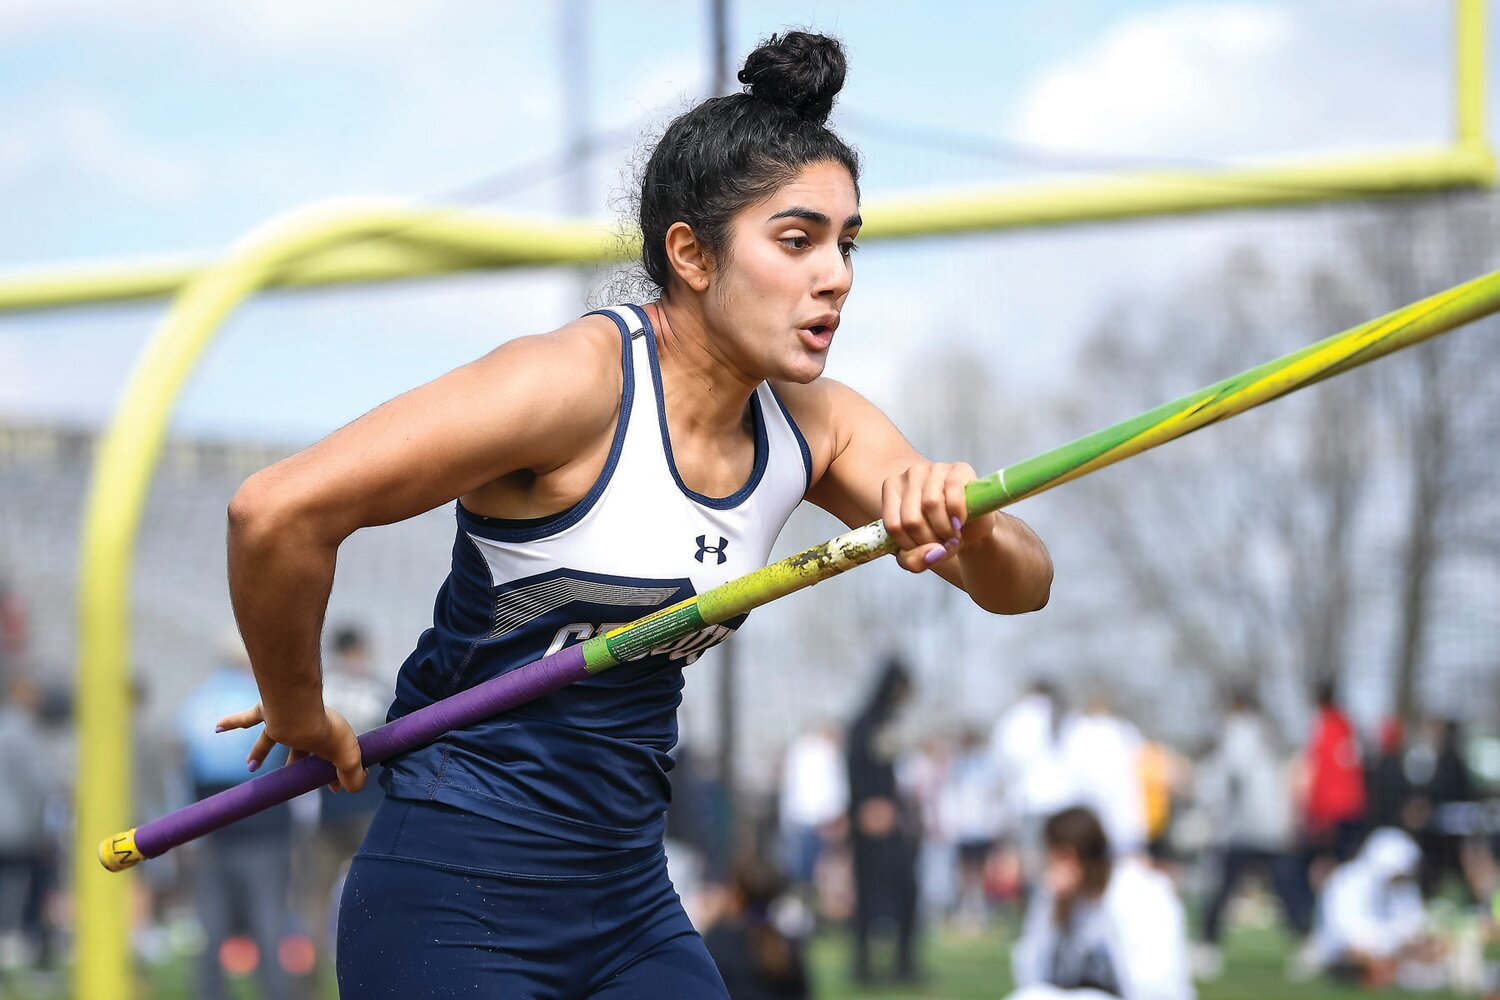 Council Rock South’s Risha Sarya finished second in the girls pole vault clearing 9 feet, 6 inches.